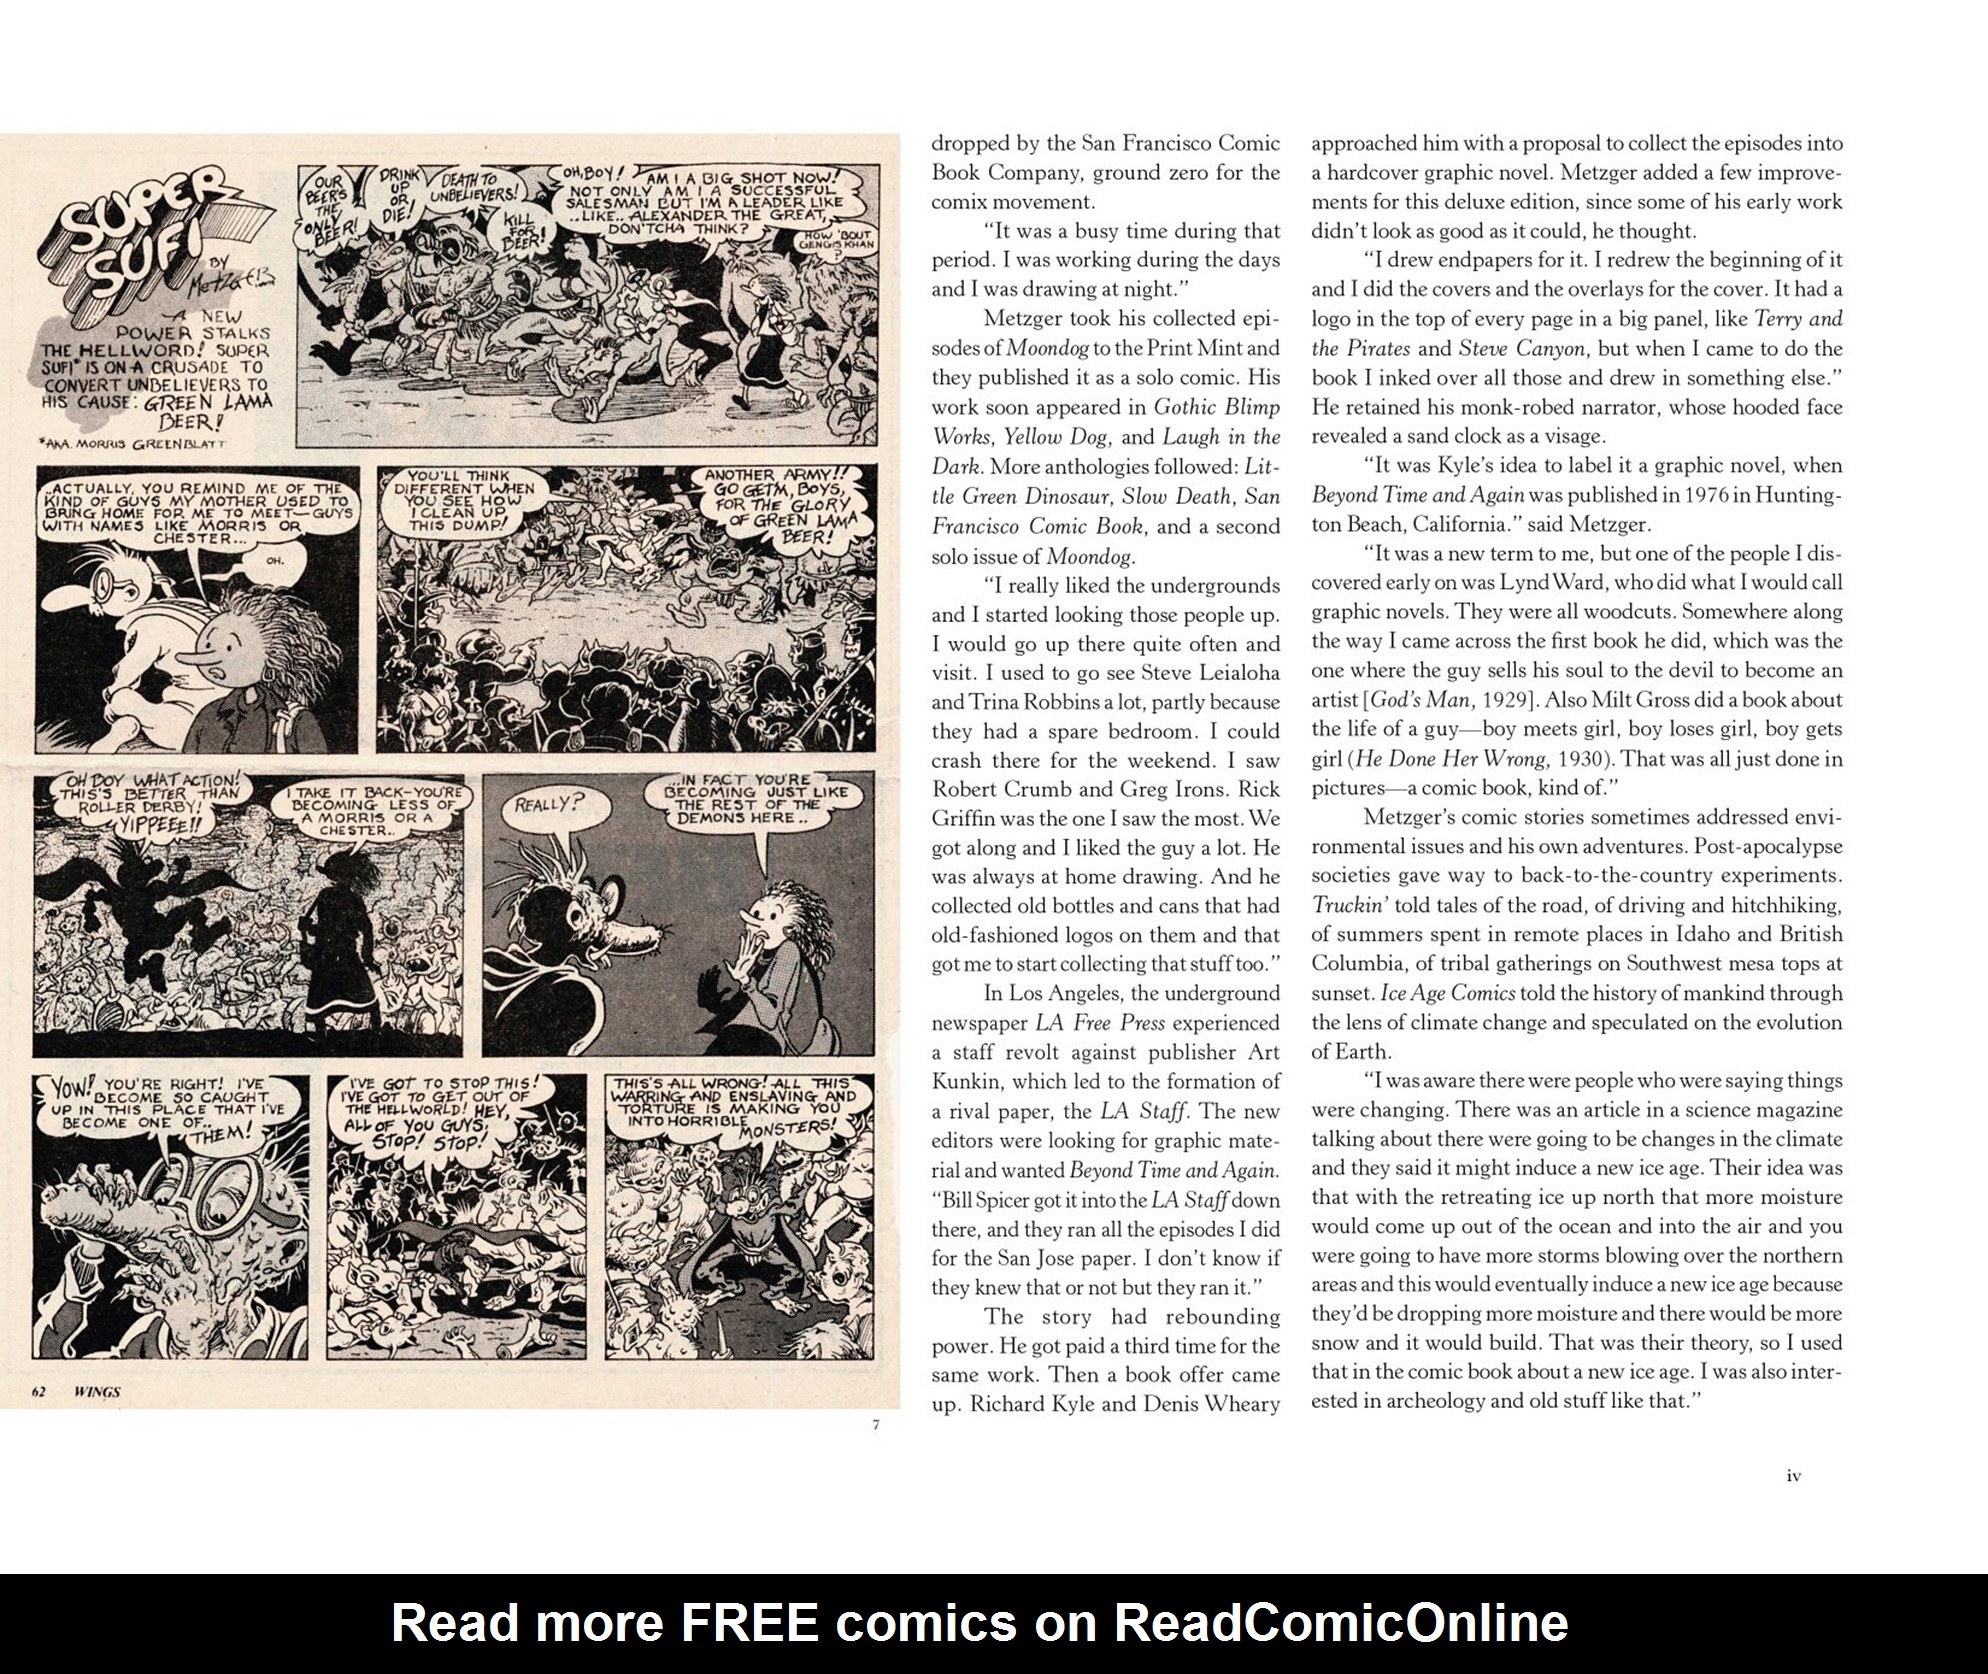 Read online Beyond Time and Again comic -  Issue # Full - 48